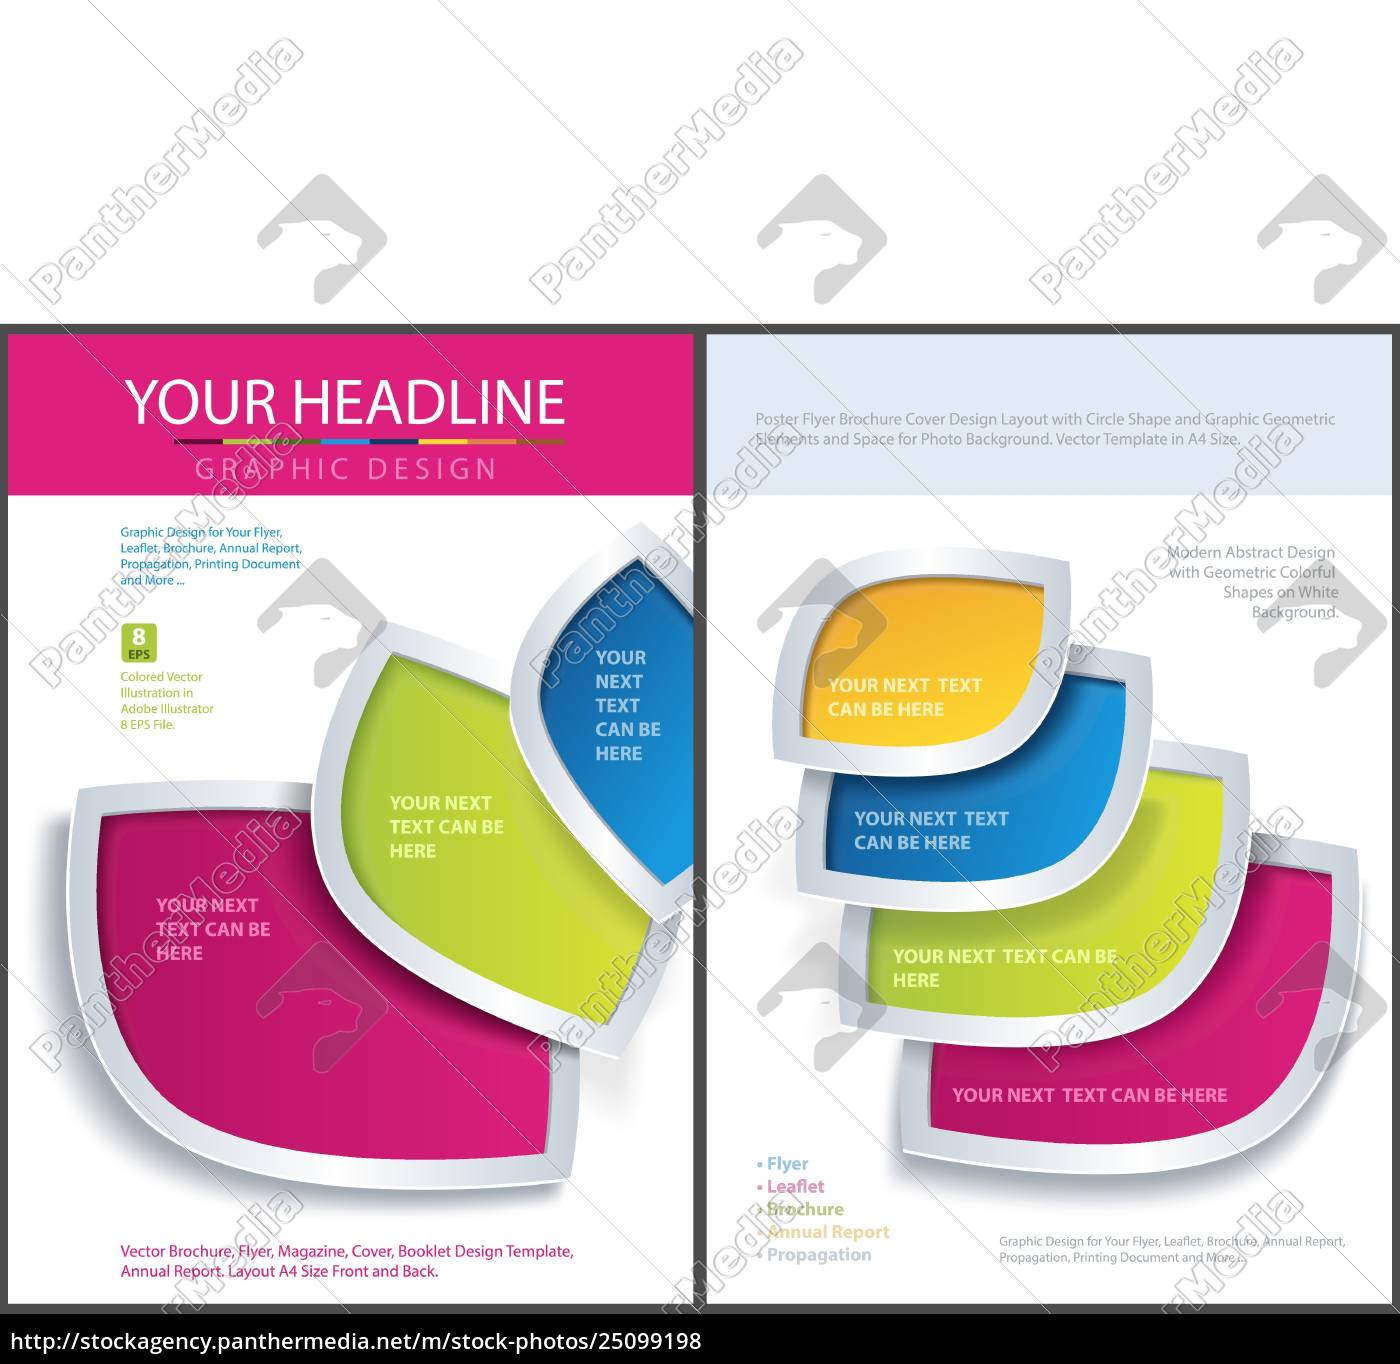 Elegant Flyer Template With Colorful Shapes Stock Image Panthermedia Stock Agency